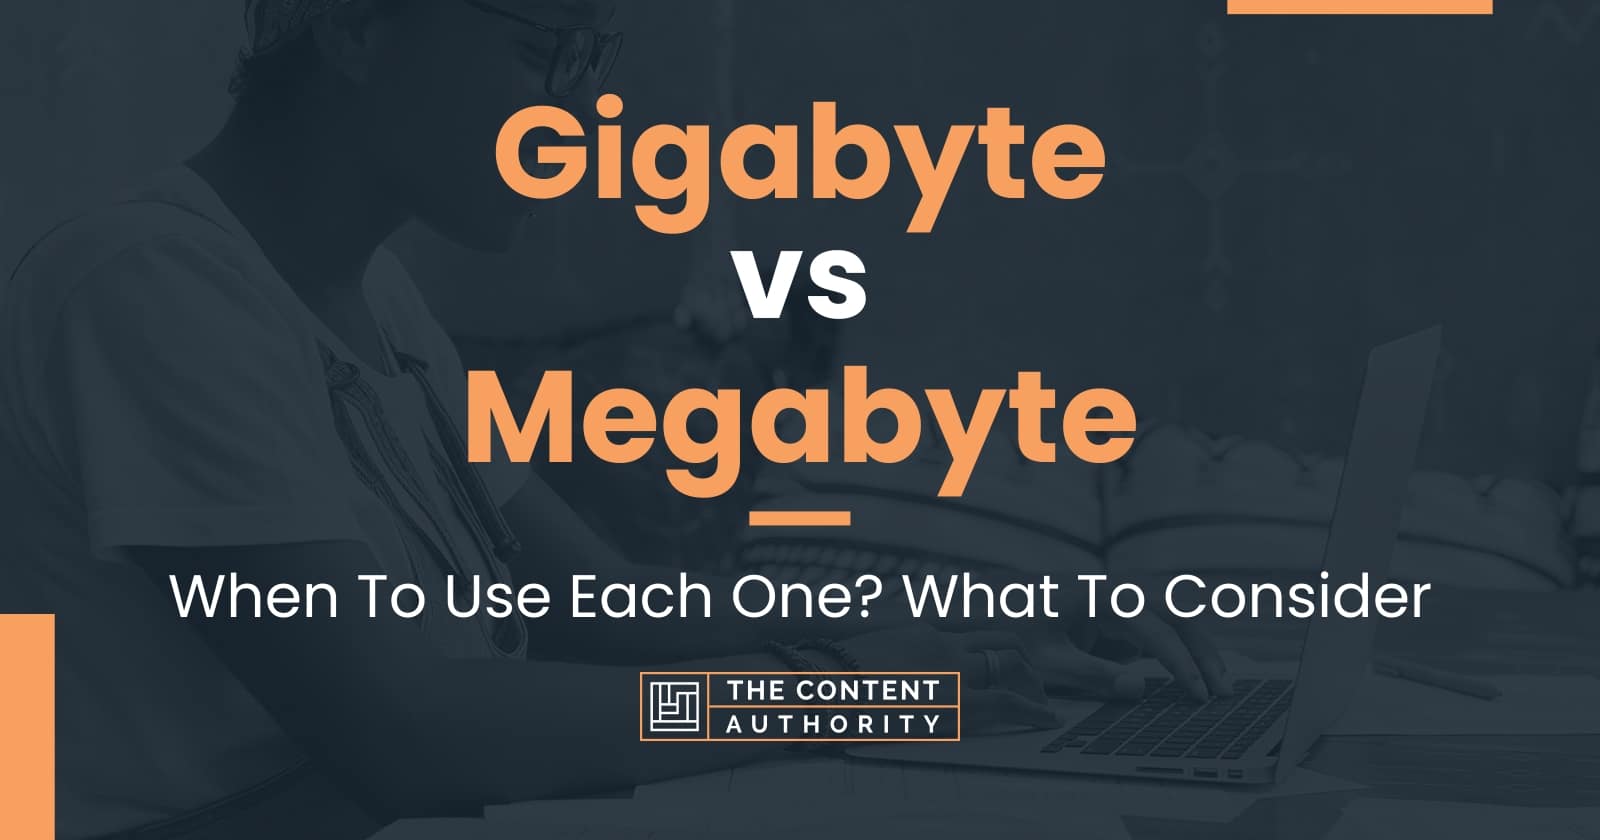 Gigabyte vs Megabyte: When To Use Each One? What To Consider